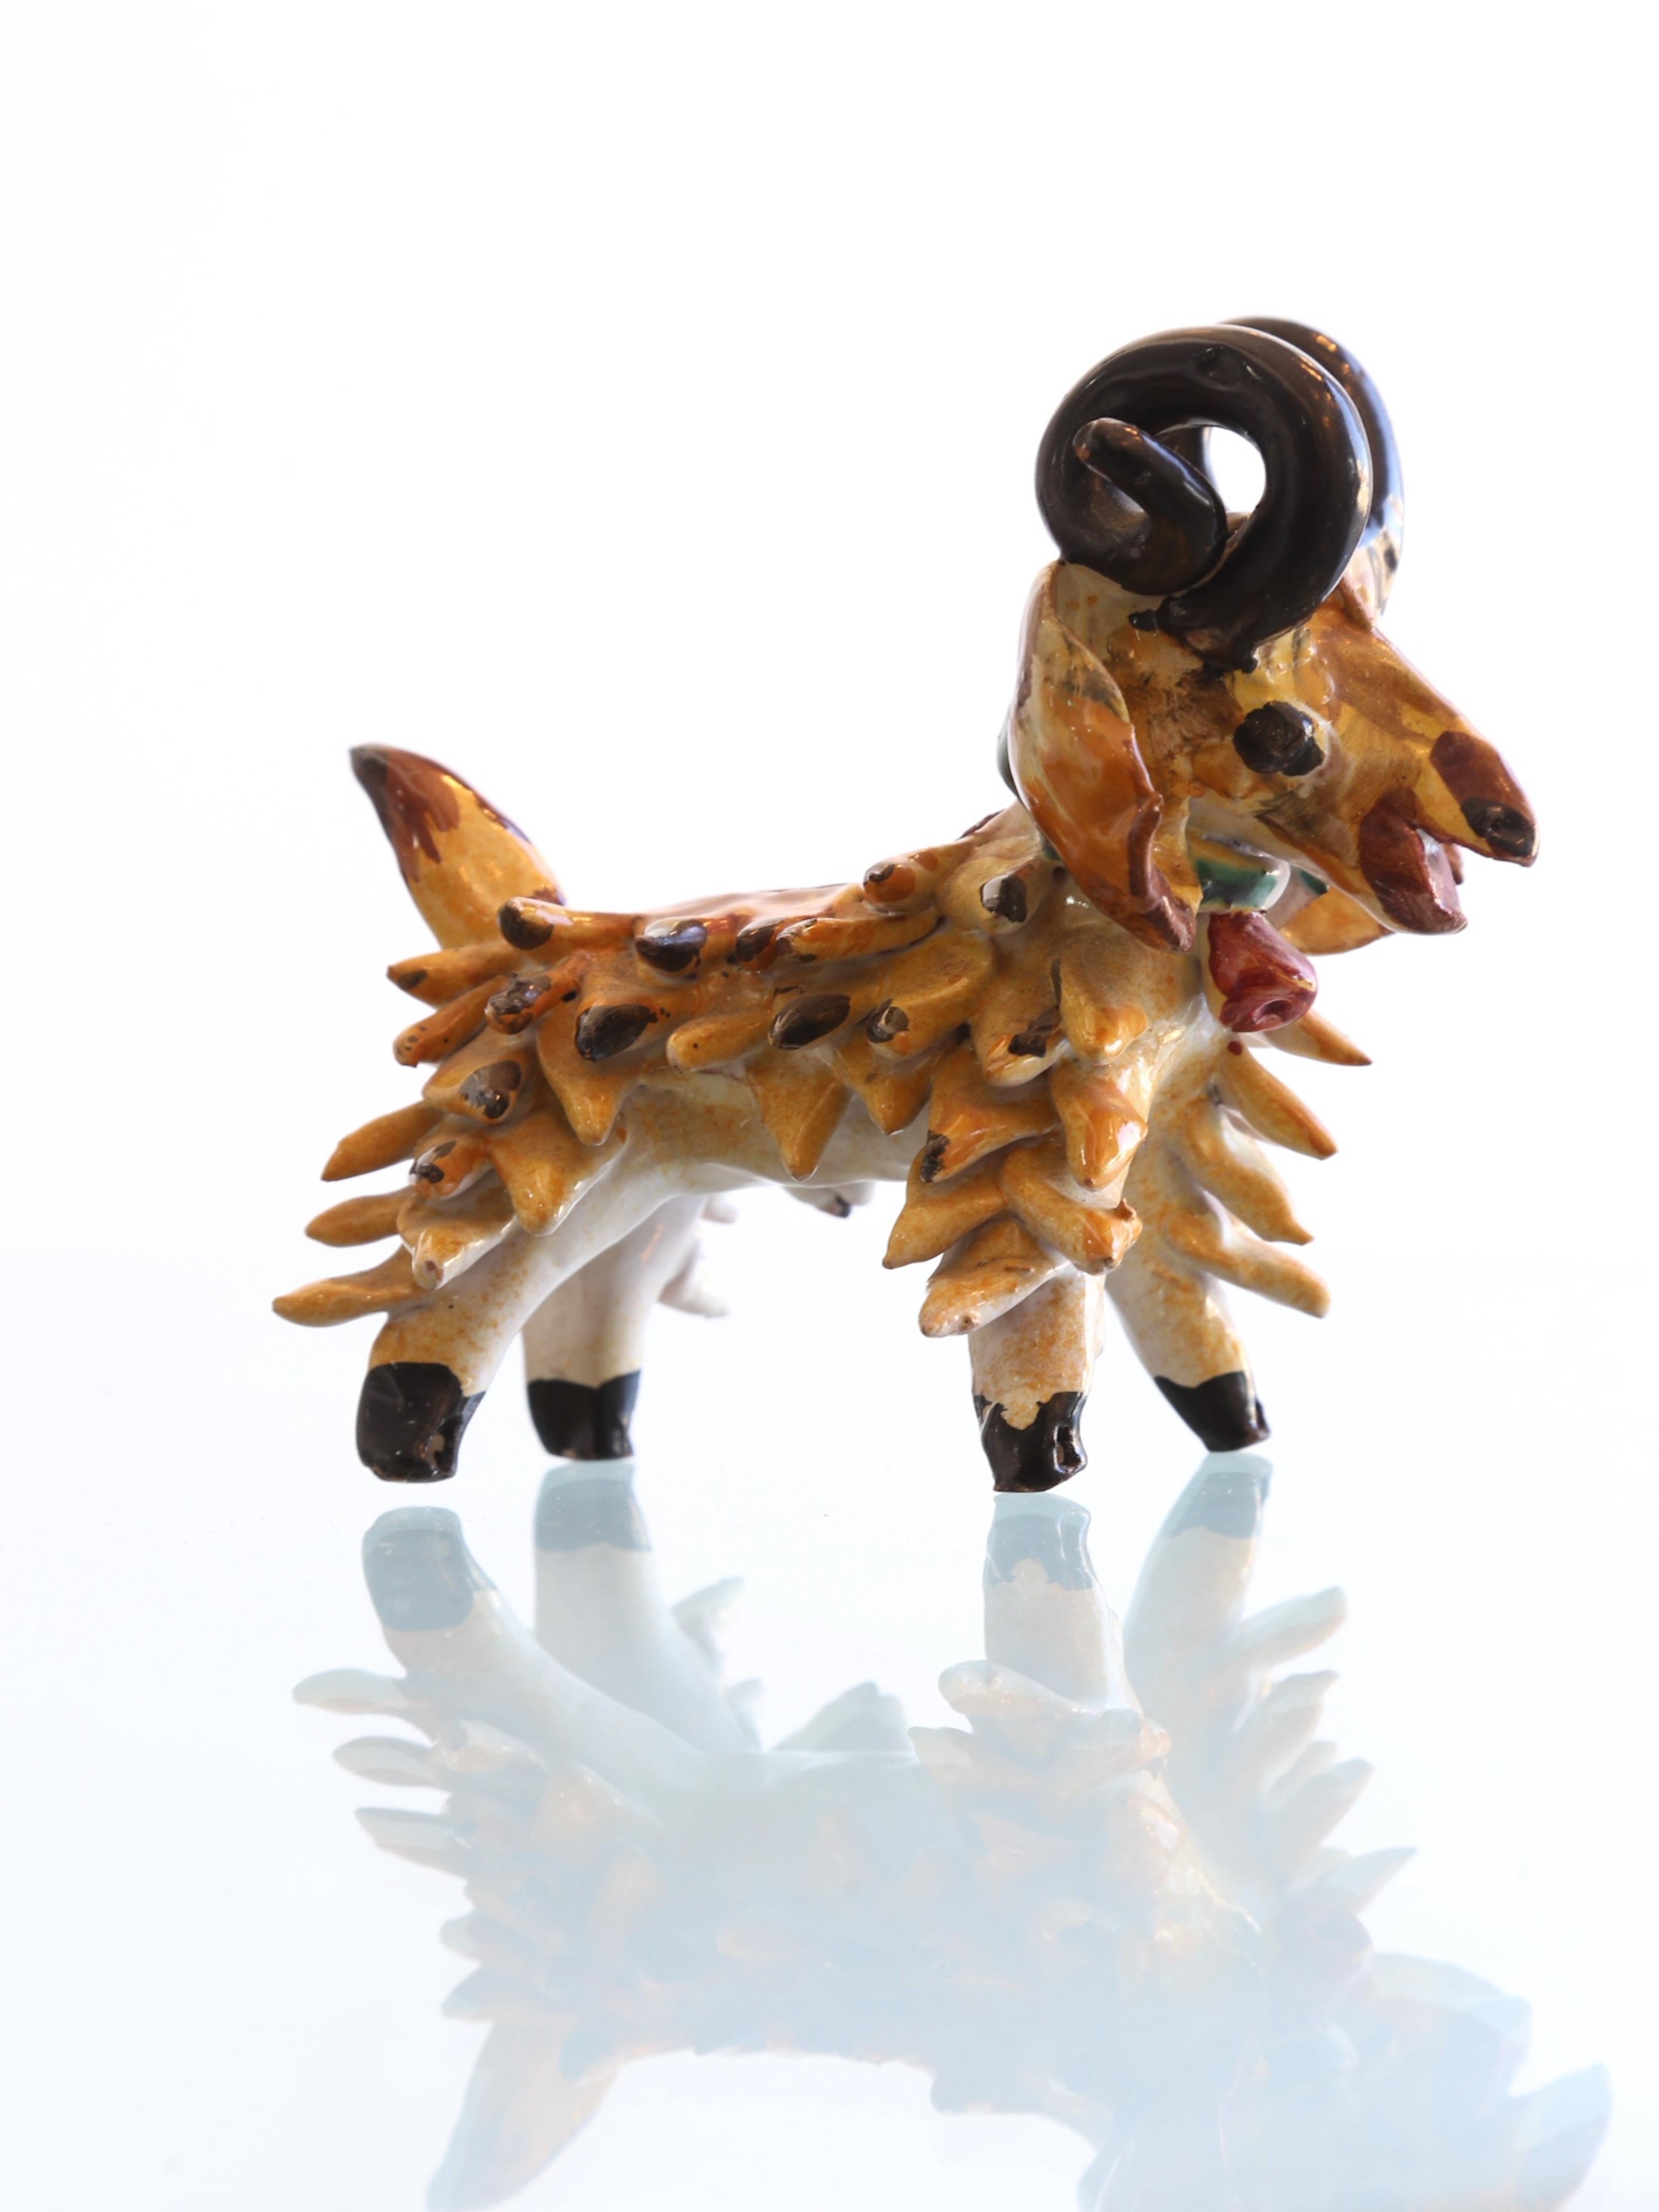 Italian ceramic animal sculptures are a popular and beautiful form of art. Italy has a rich tradition of ceramic production and many skilled artisans who specialize in creating animal sculptures.

Italian ceramic animal sculptures can be found in